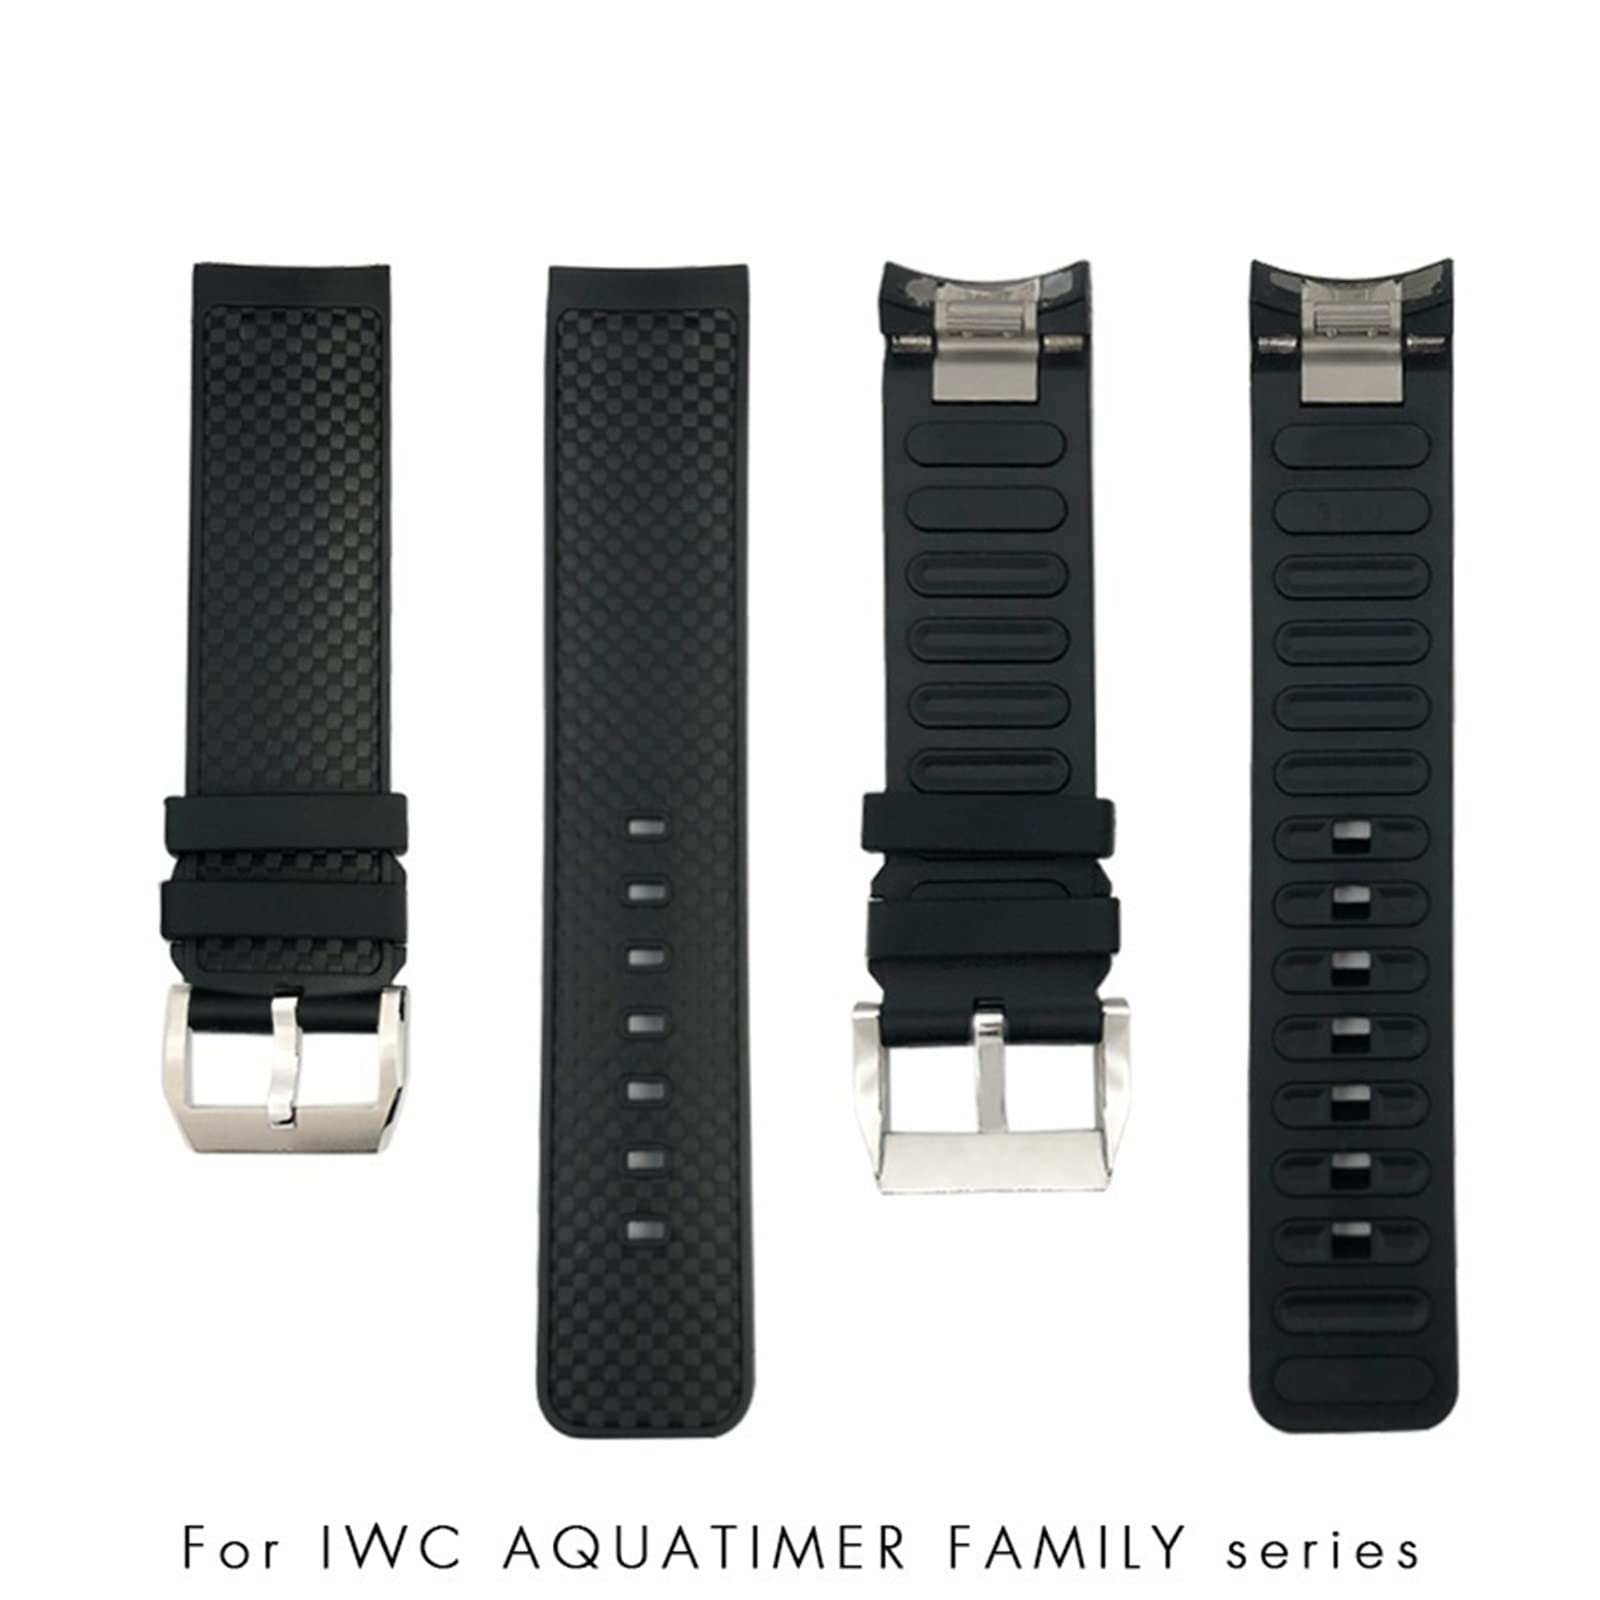 Wscebck 22mm Rubber Watchband Fit for IWC AQUATIMER Family IW376805 IW329001 Quick Release Waterproof Watch Strap